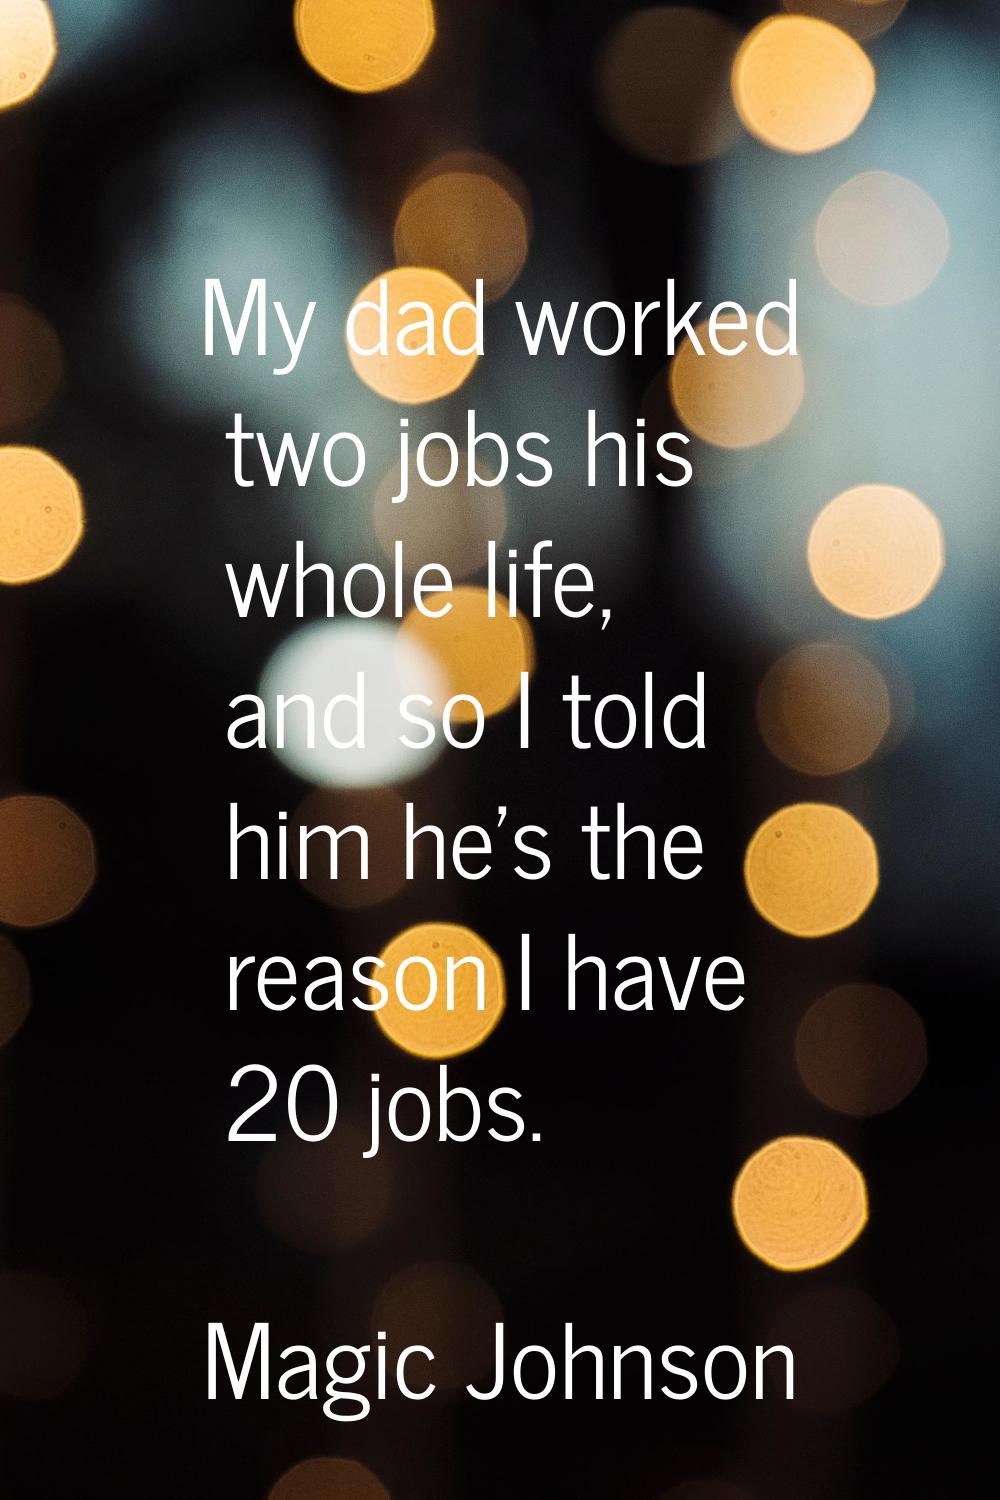 My dad worked two jobs his whole life, and so I told him he's the reason I have 20 jobs.